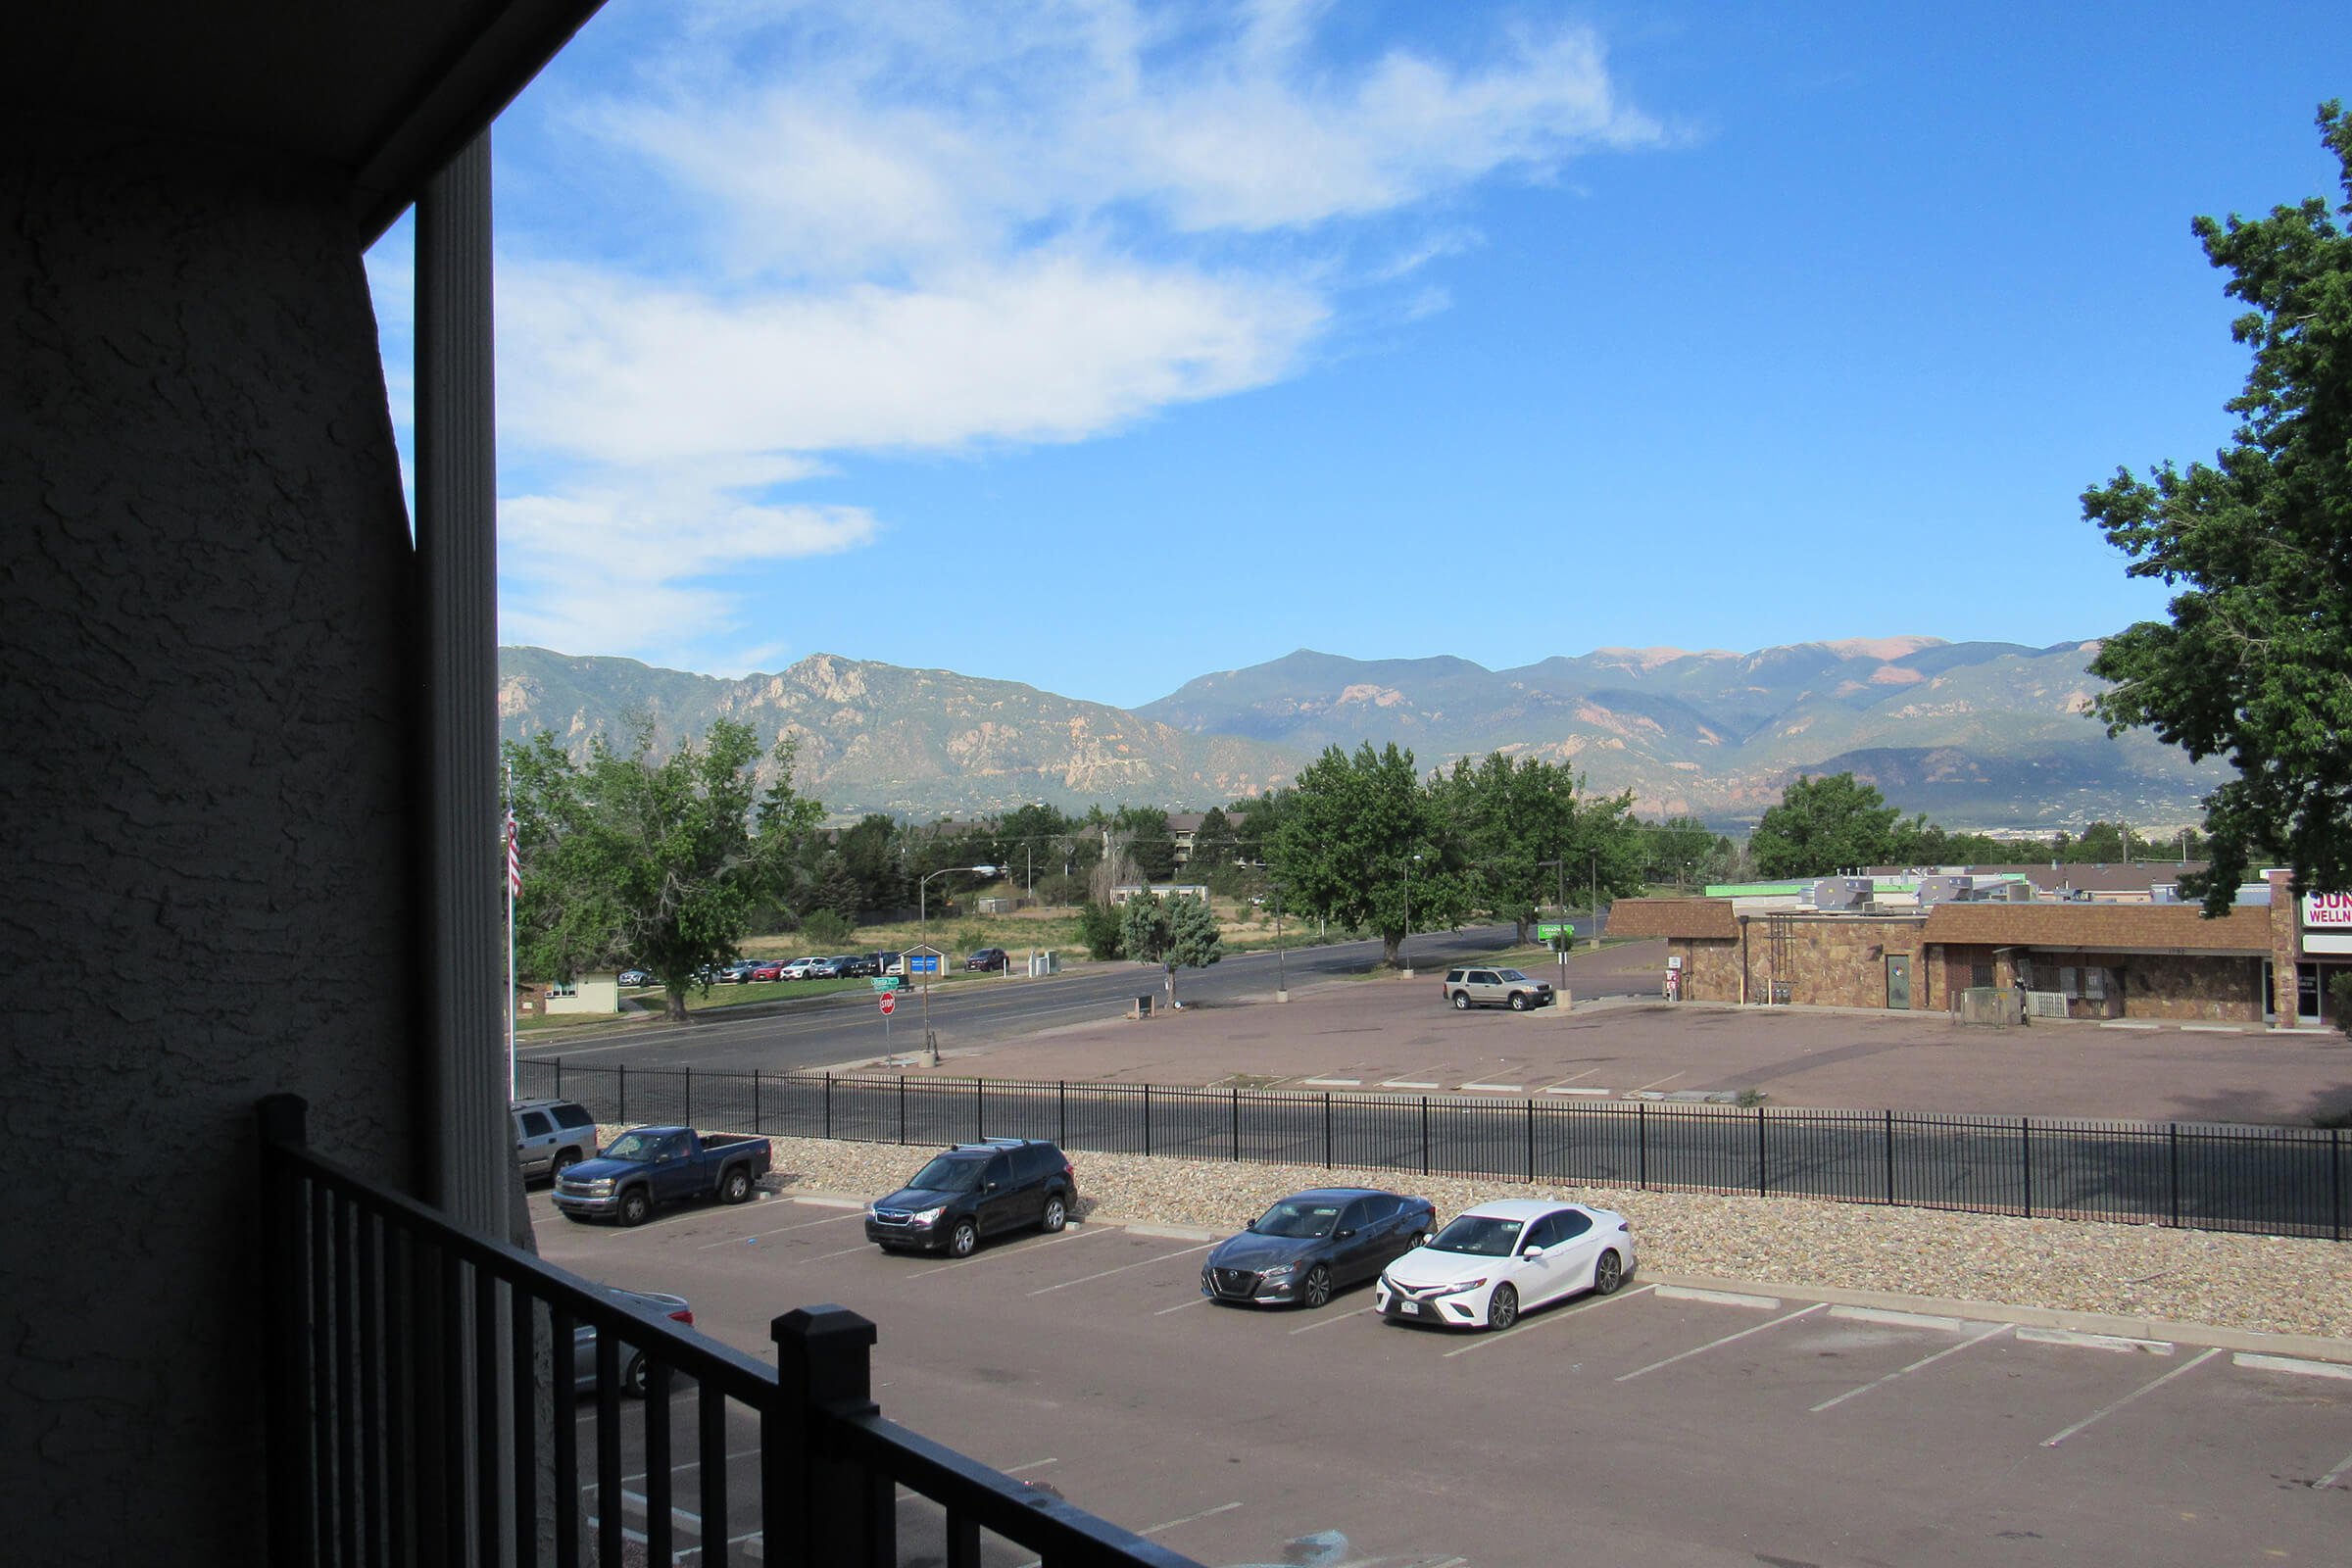 One and two bedroom apartments with balconies at Sedona Ridge Apartments, located in Colorado Springs, CO.